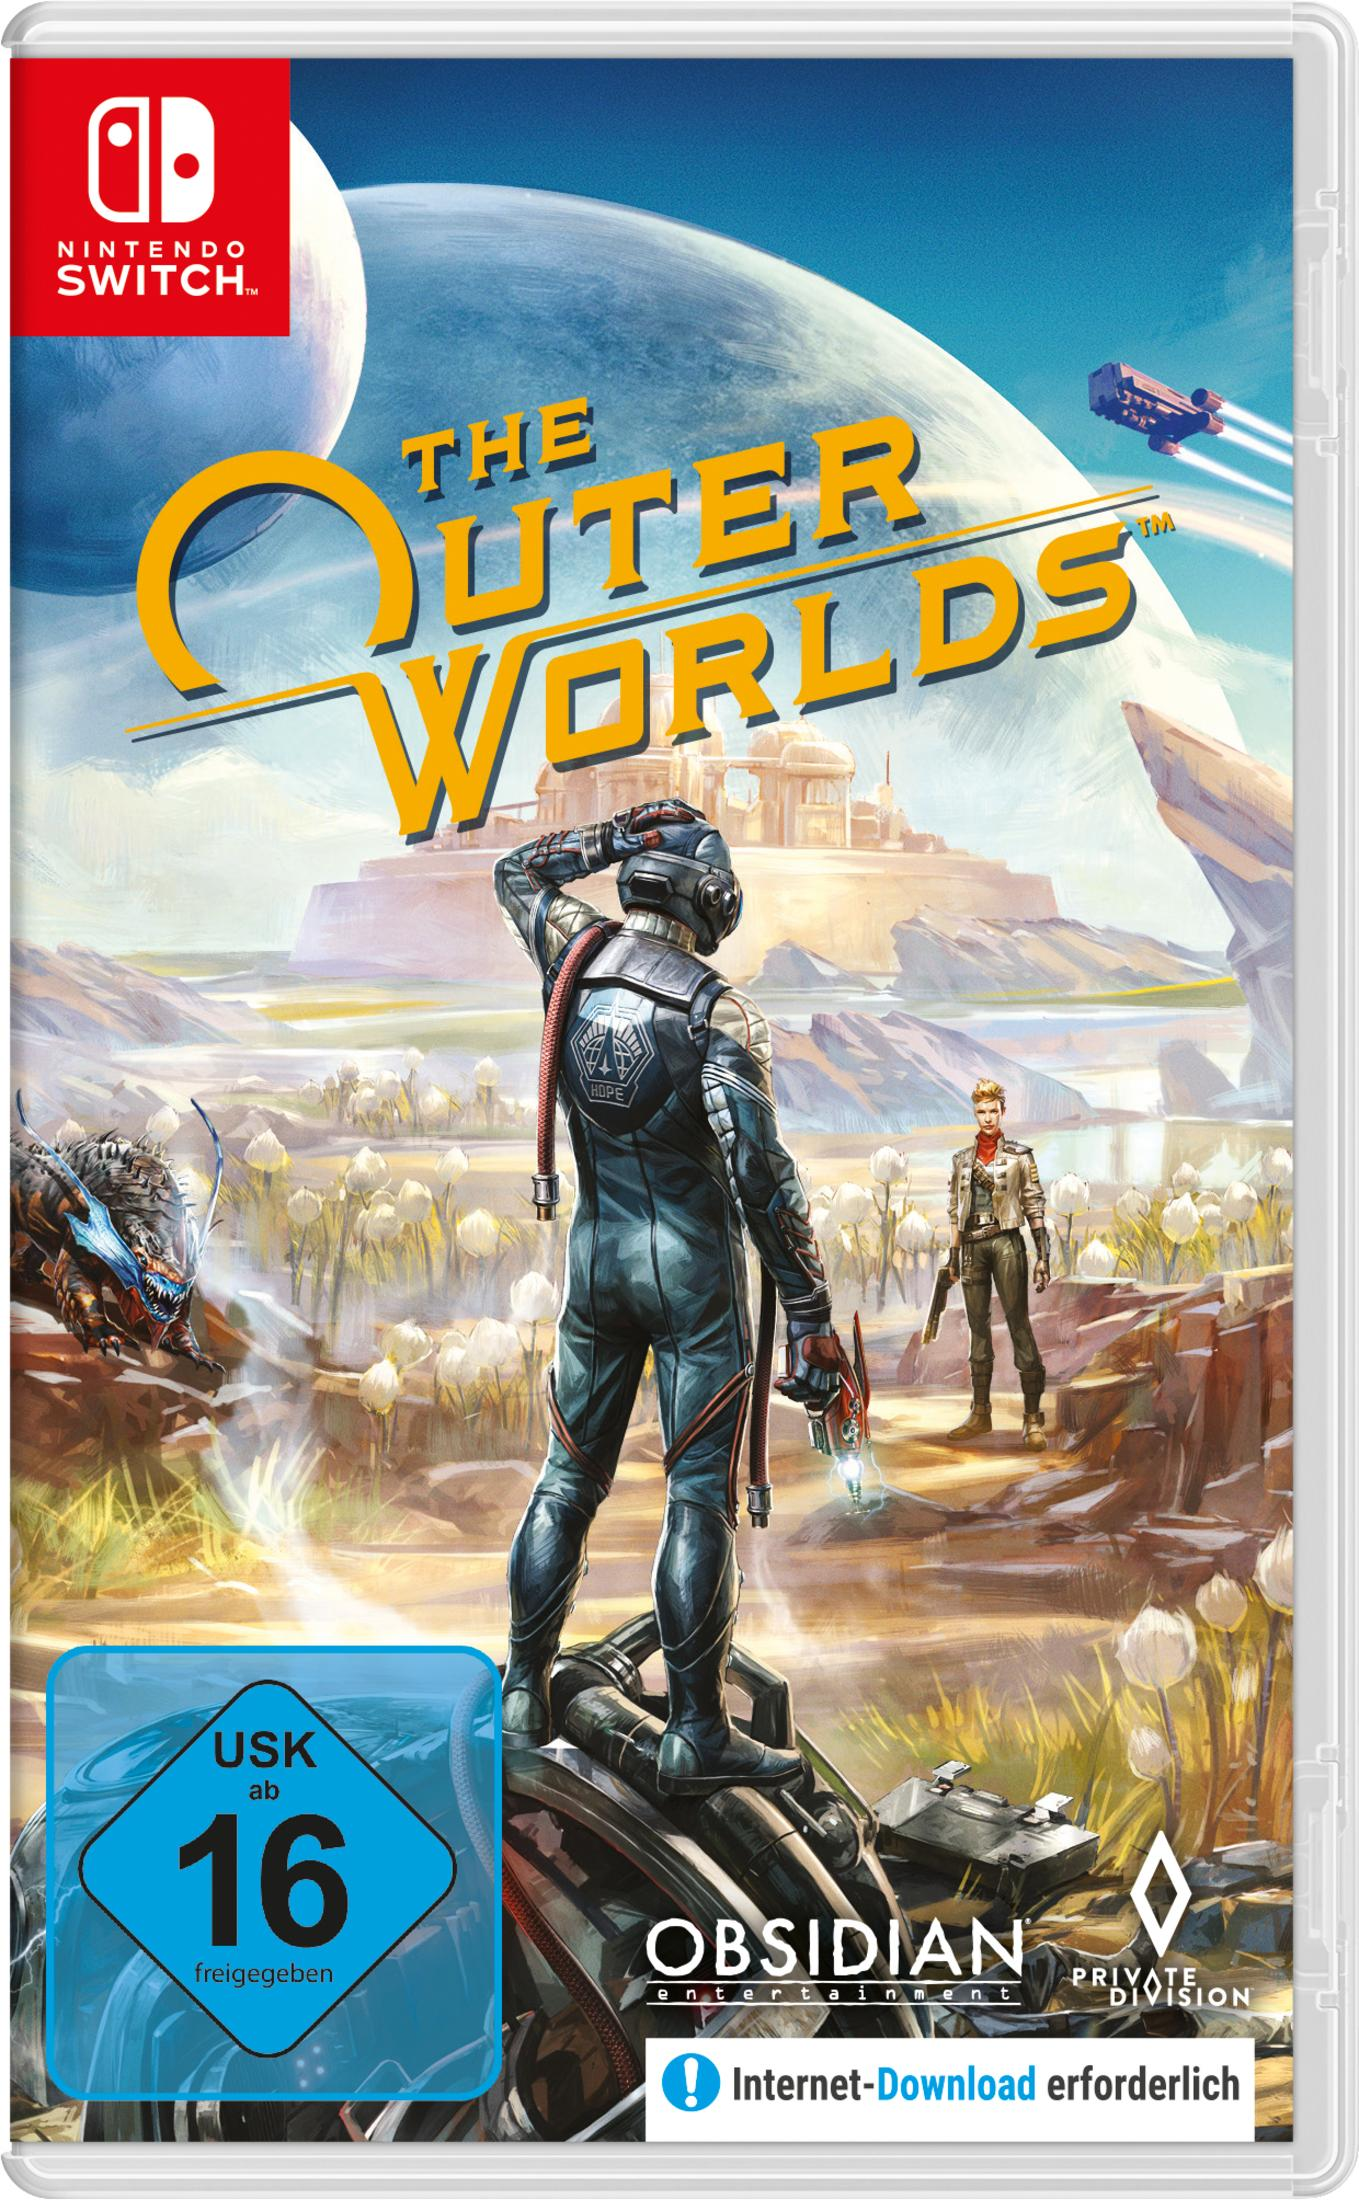 Outer - Switch] Worlds The [Nintendo